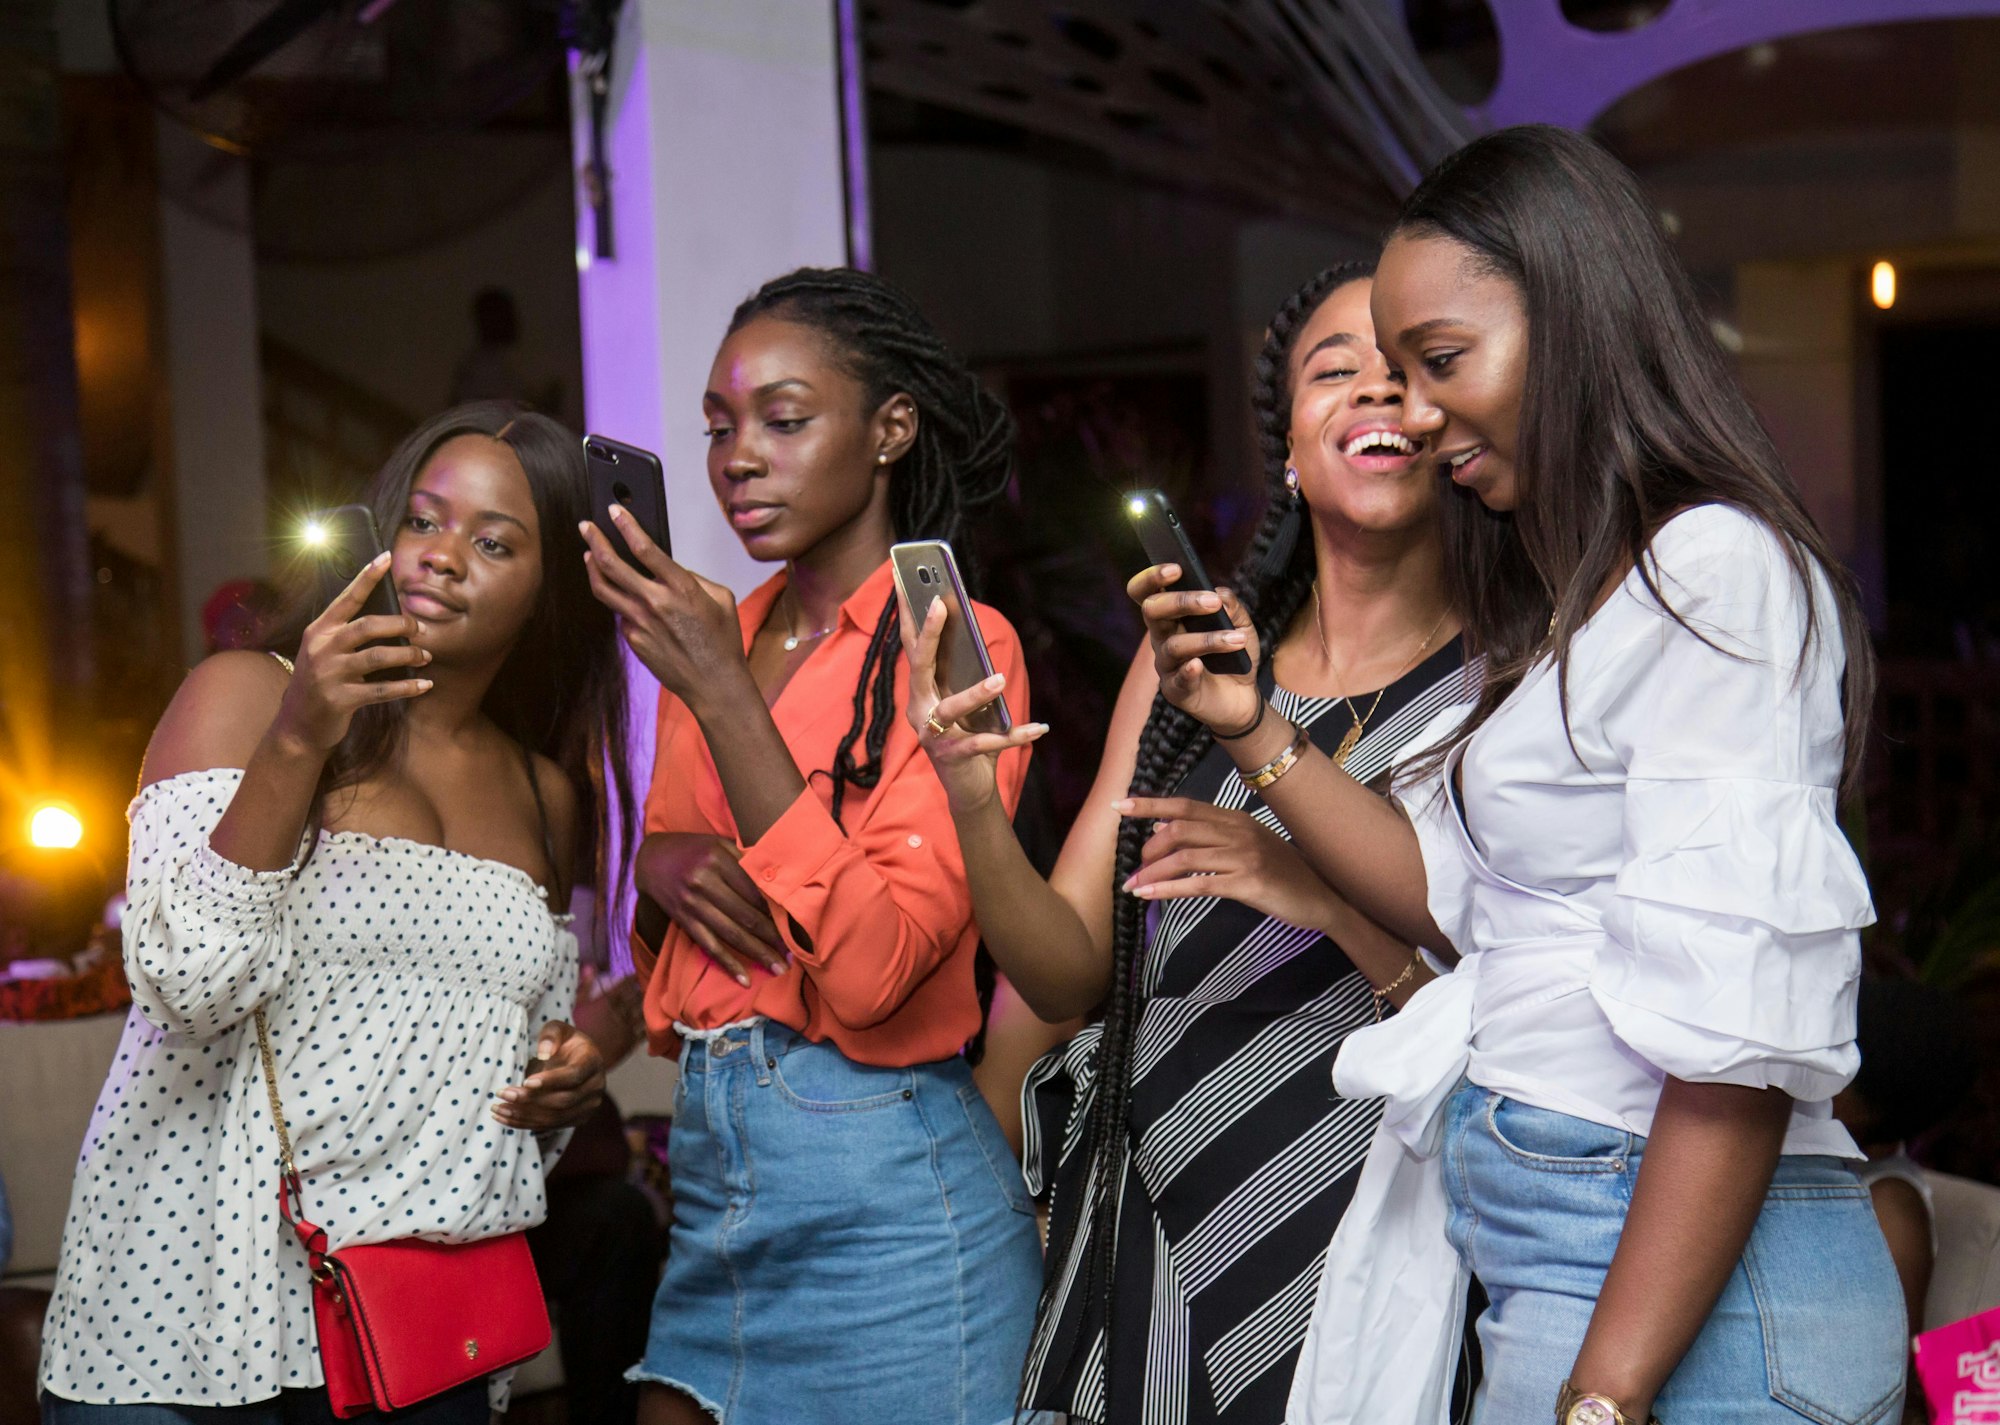 The Exciting Relationship Between Women and Mobile Money in Africa